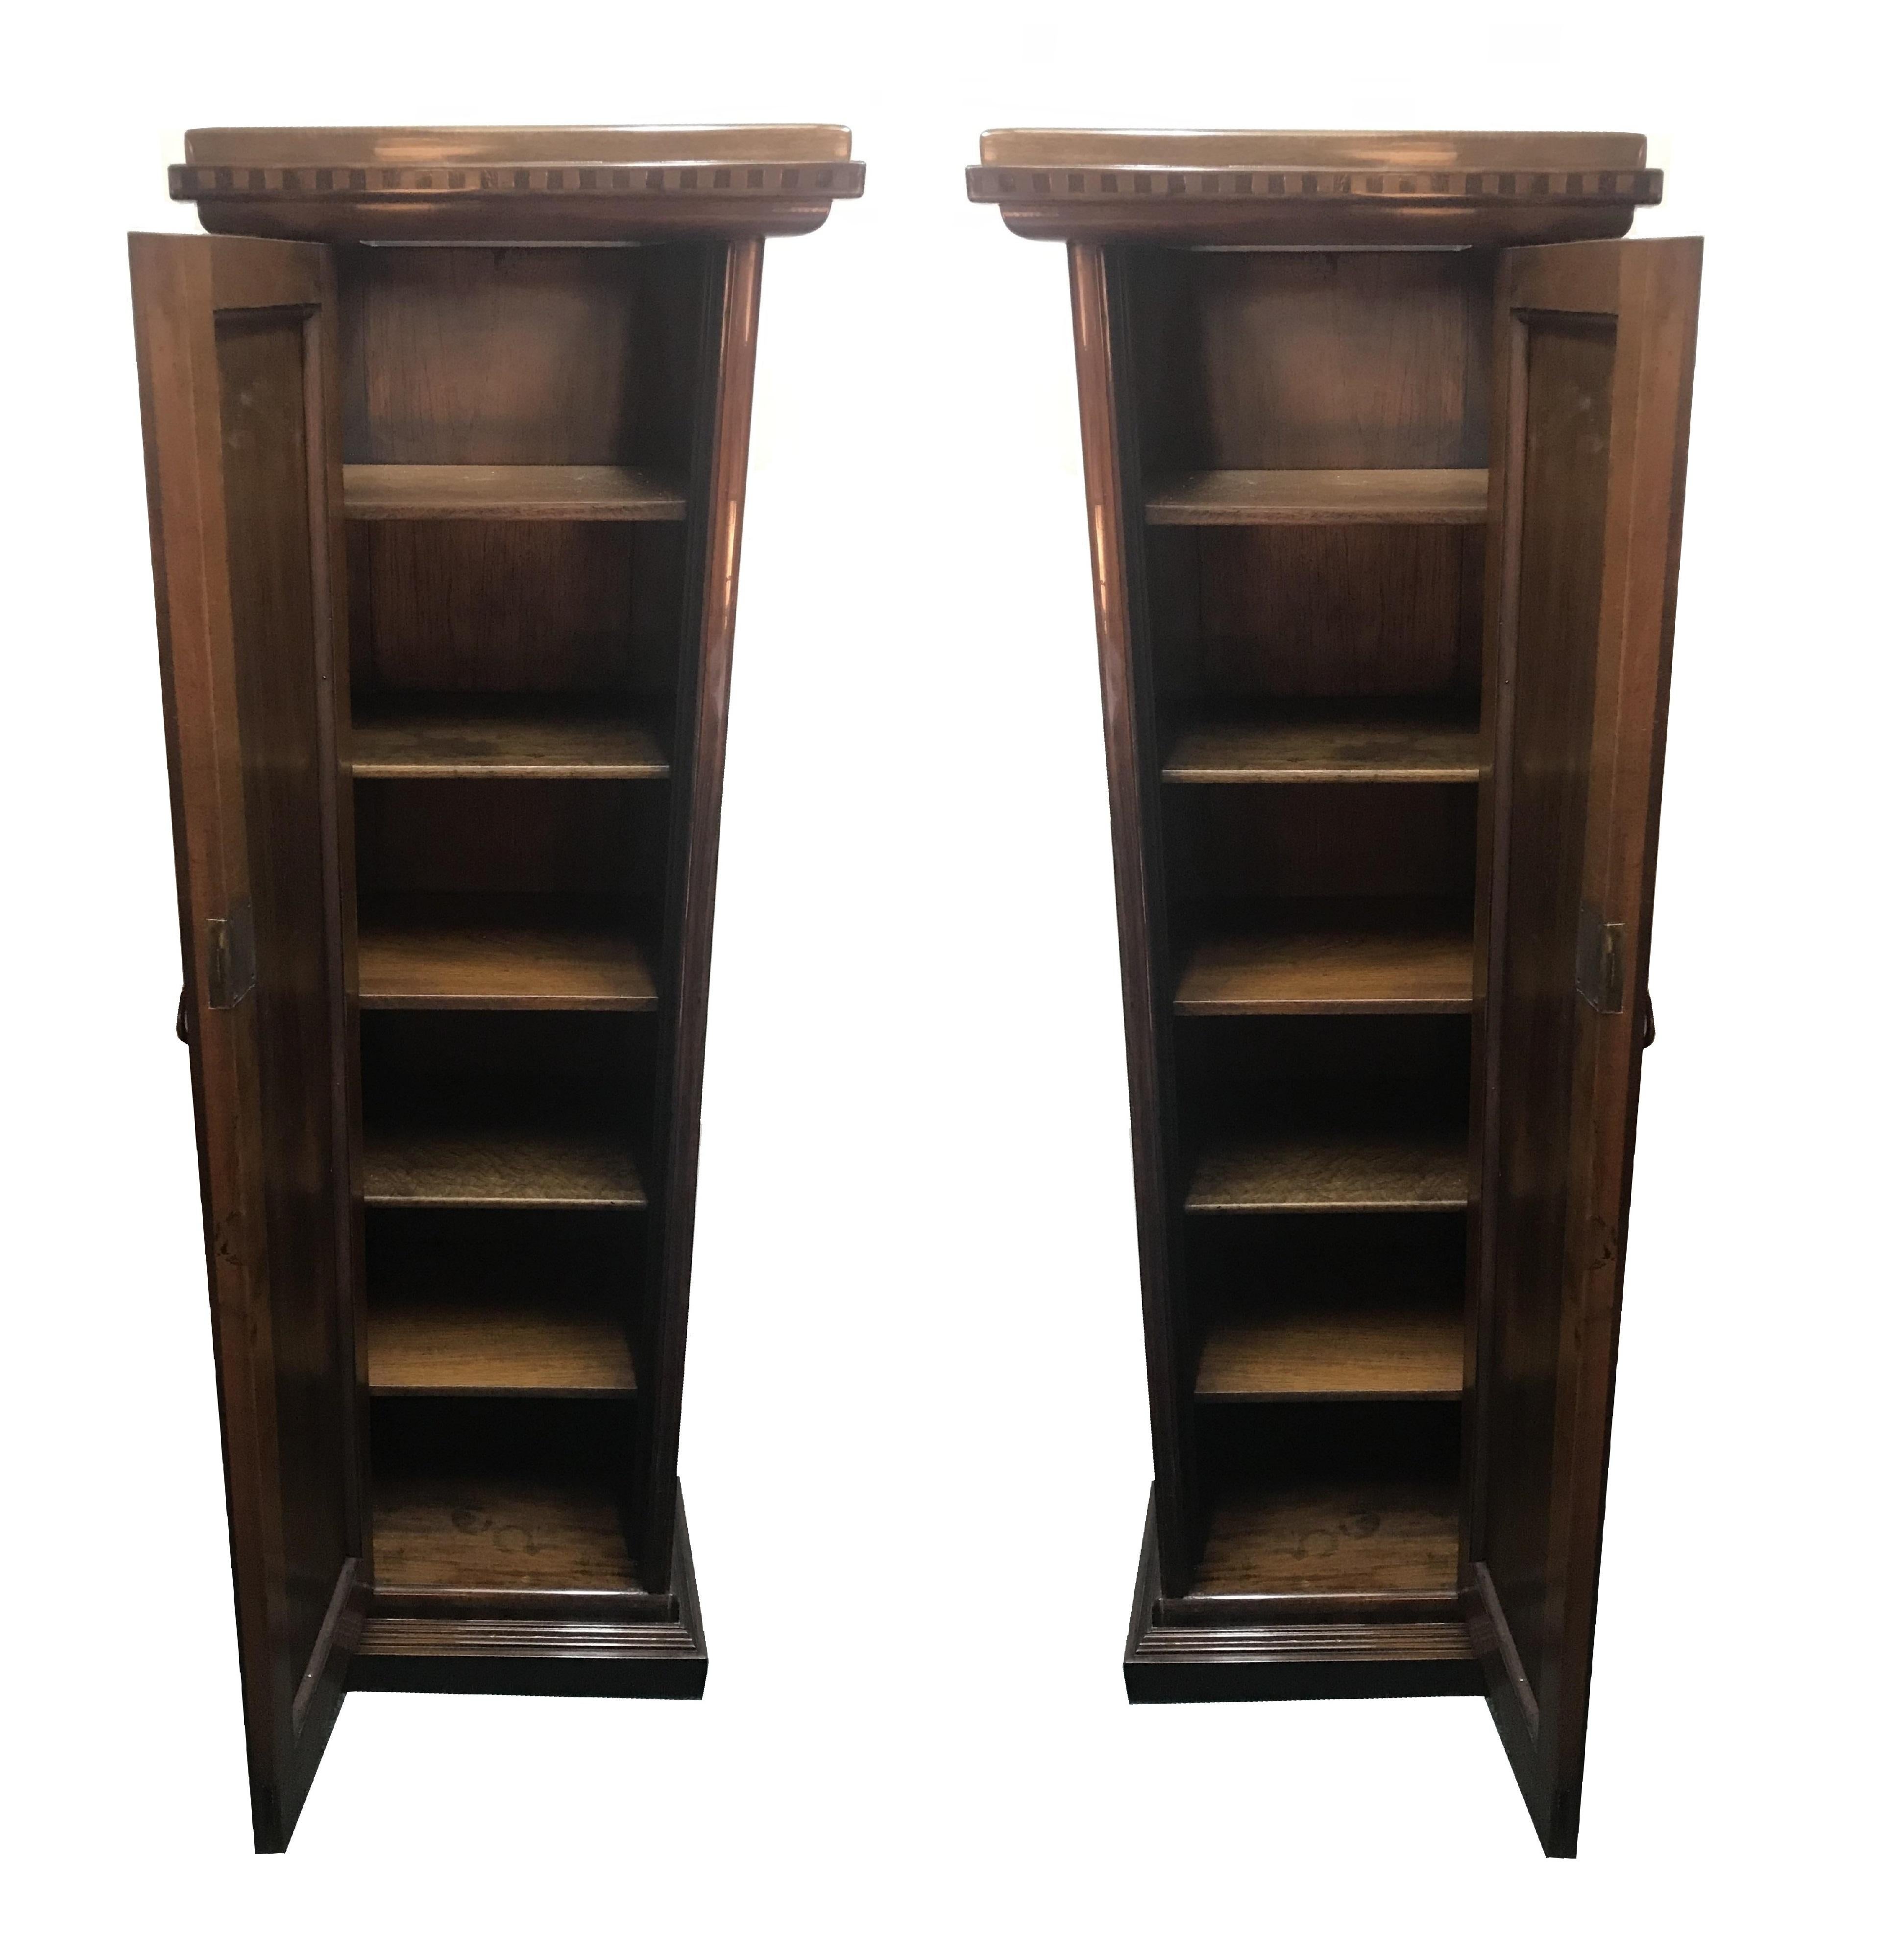 Wood Pair of Art Deco Columns with shelves, 1930, French For Sale